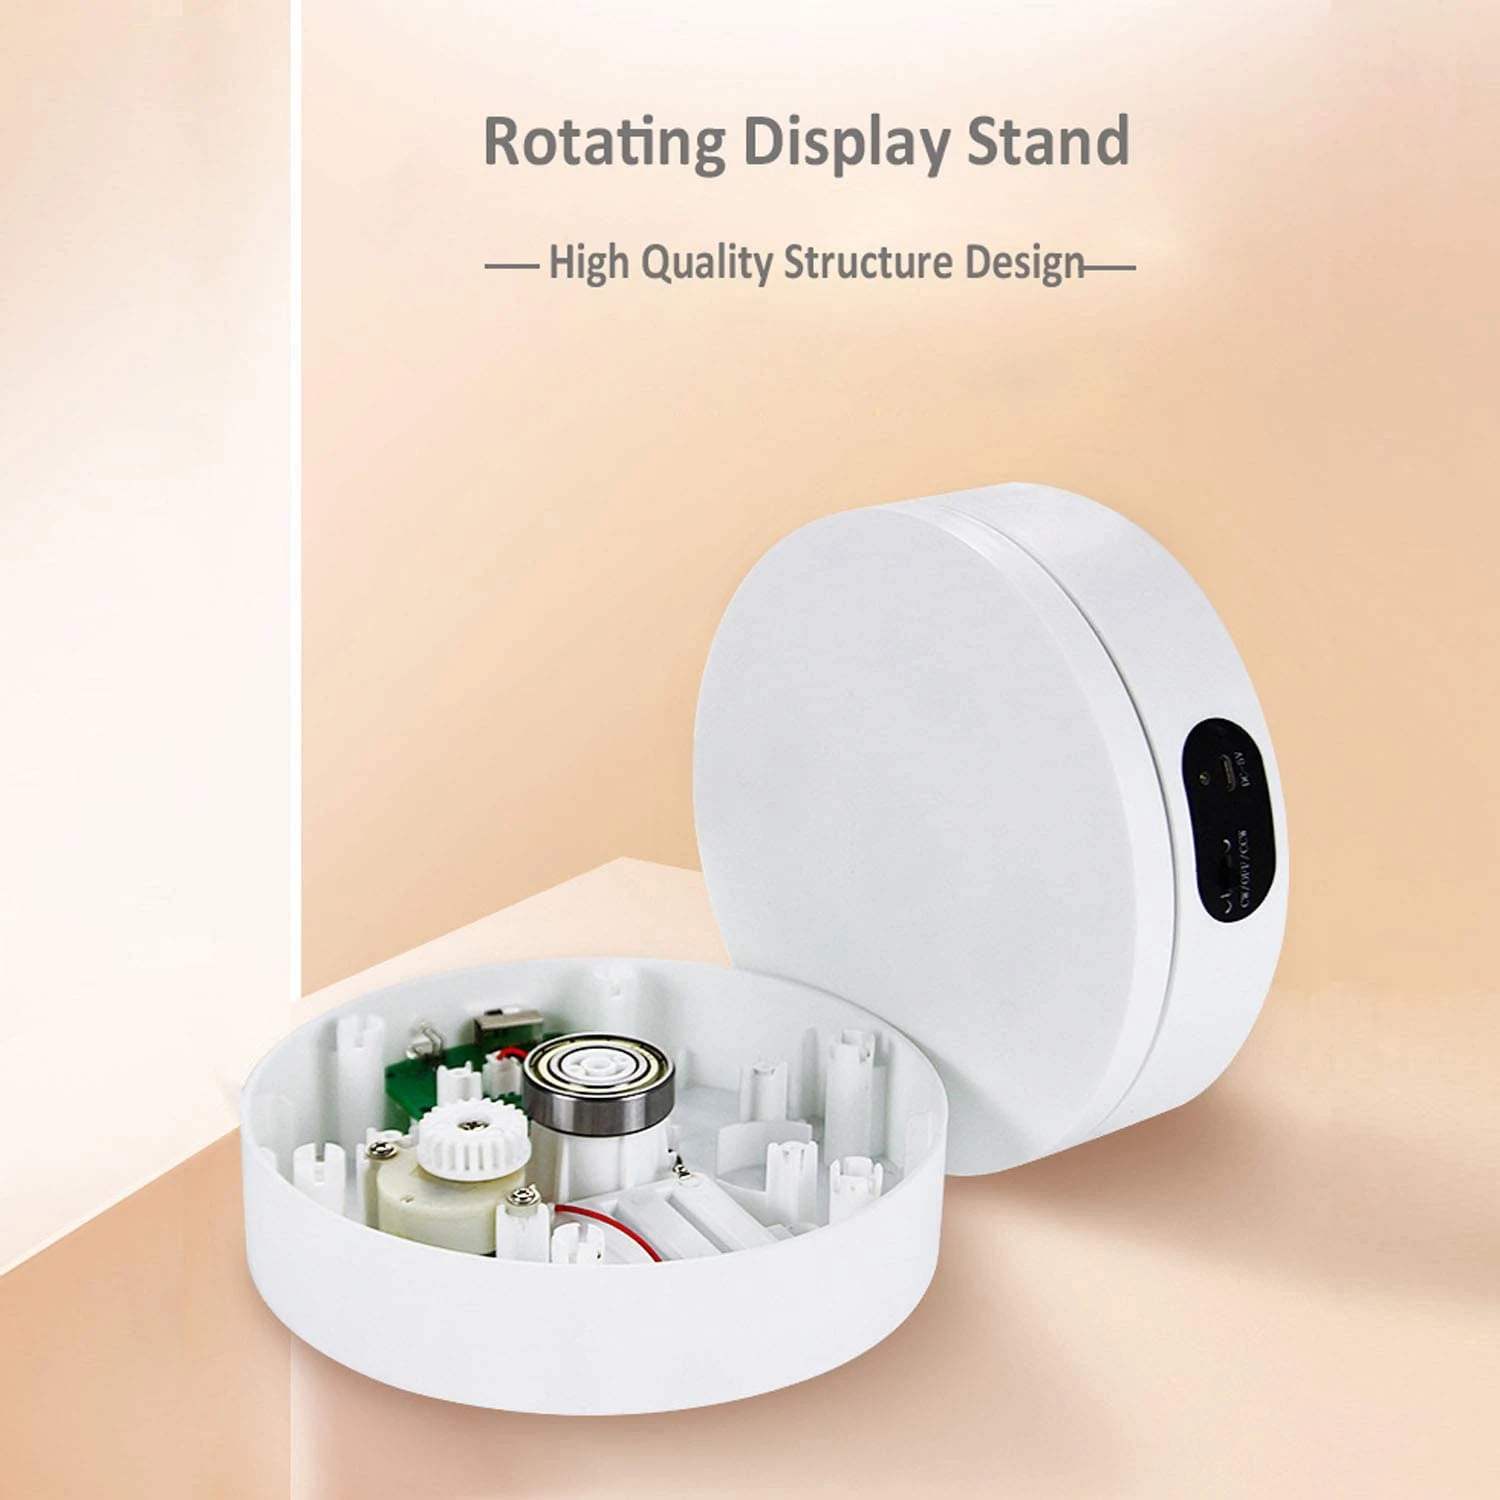 Electric Rotating Display Stand 360 Degree Turntable Jewelry Holder Battery for Photography Video Shooting Props